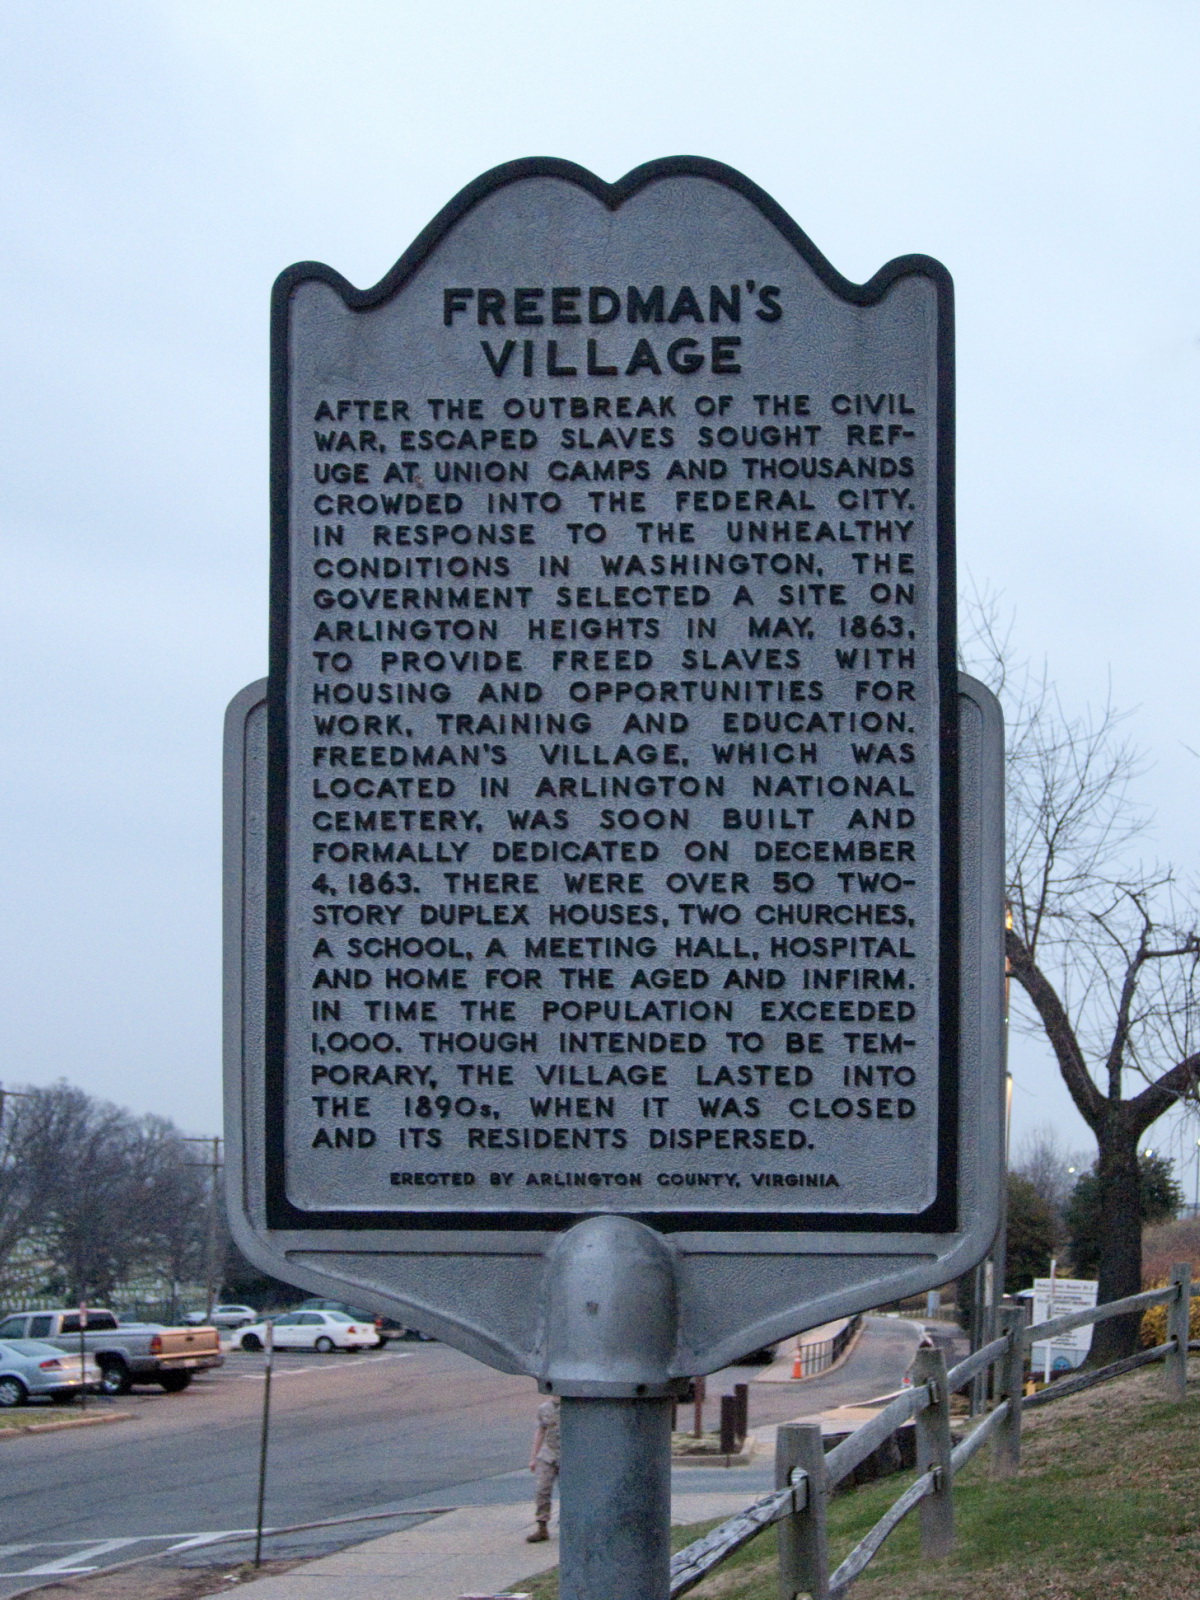 a historical marker about a village that is located next to a street